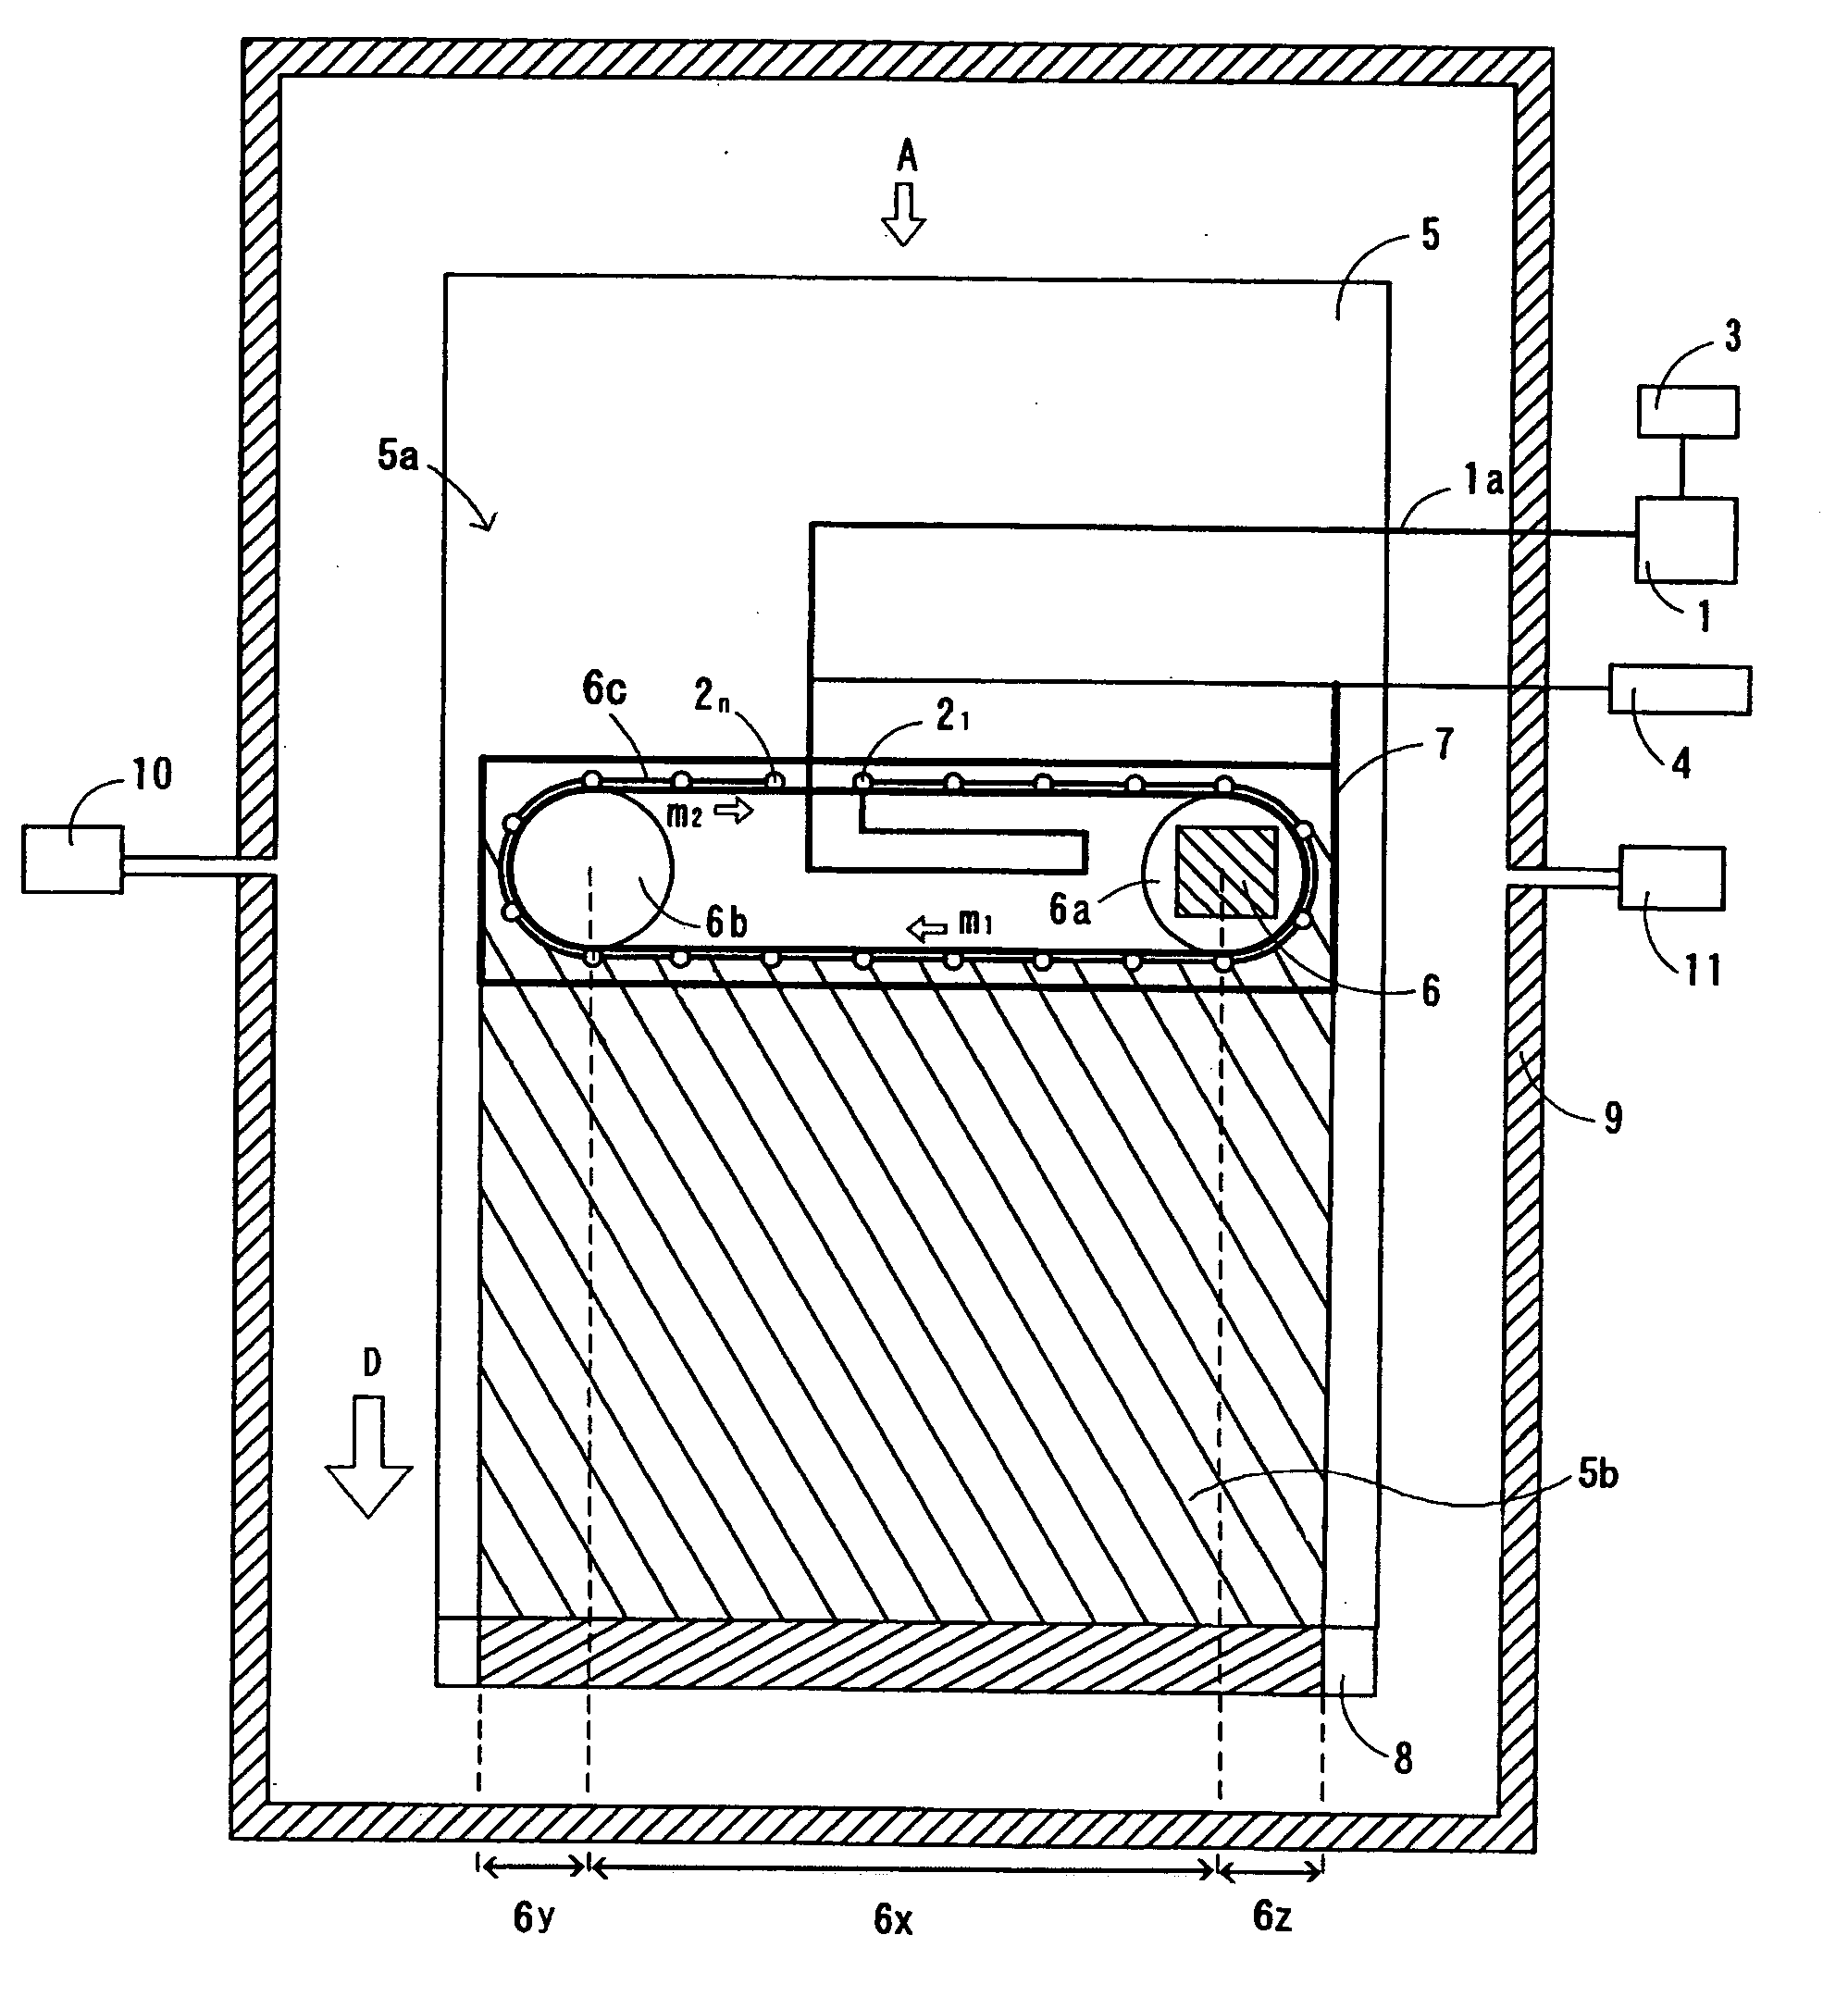 Method and apparatus of producing fibrous aggregate